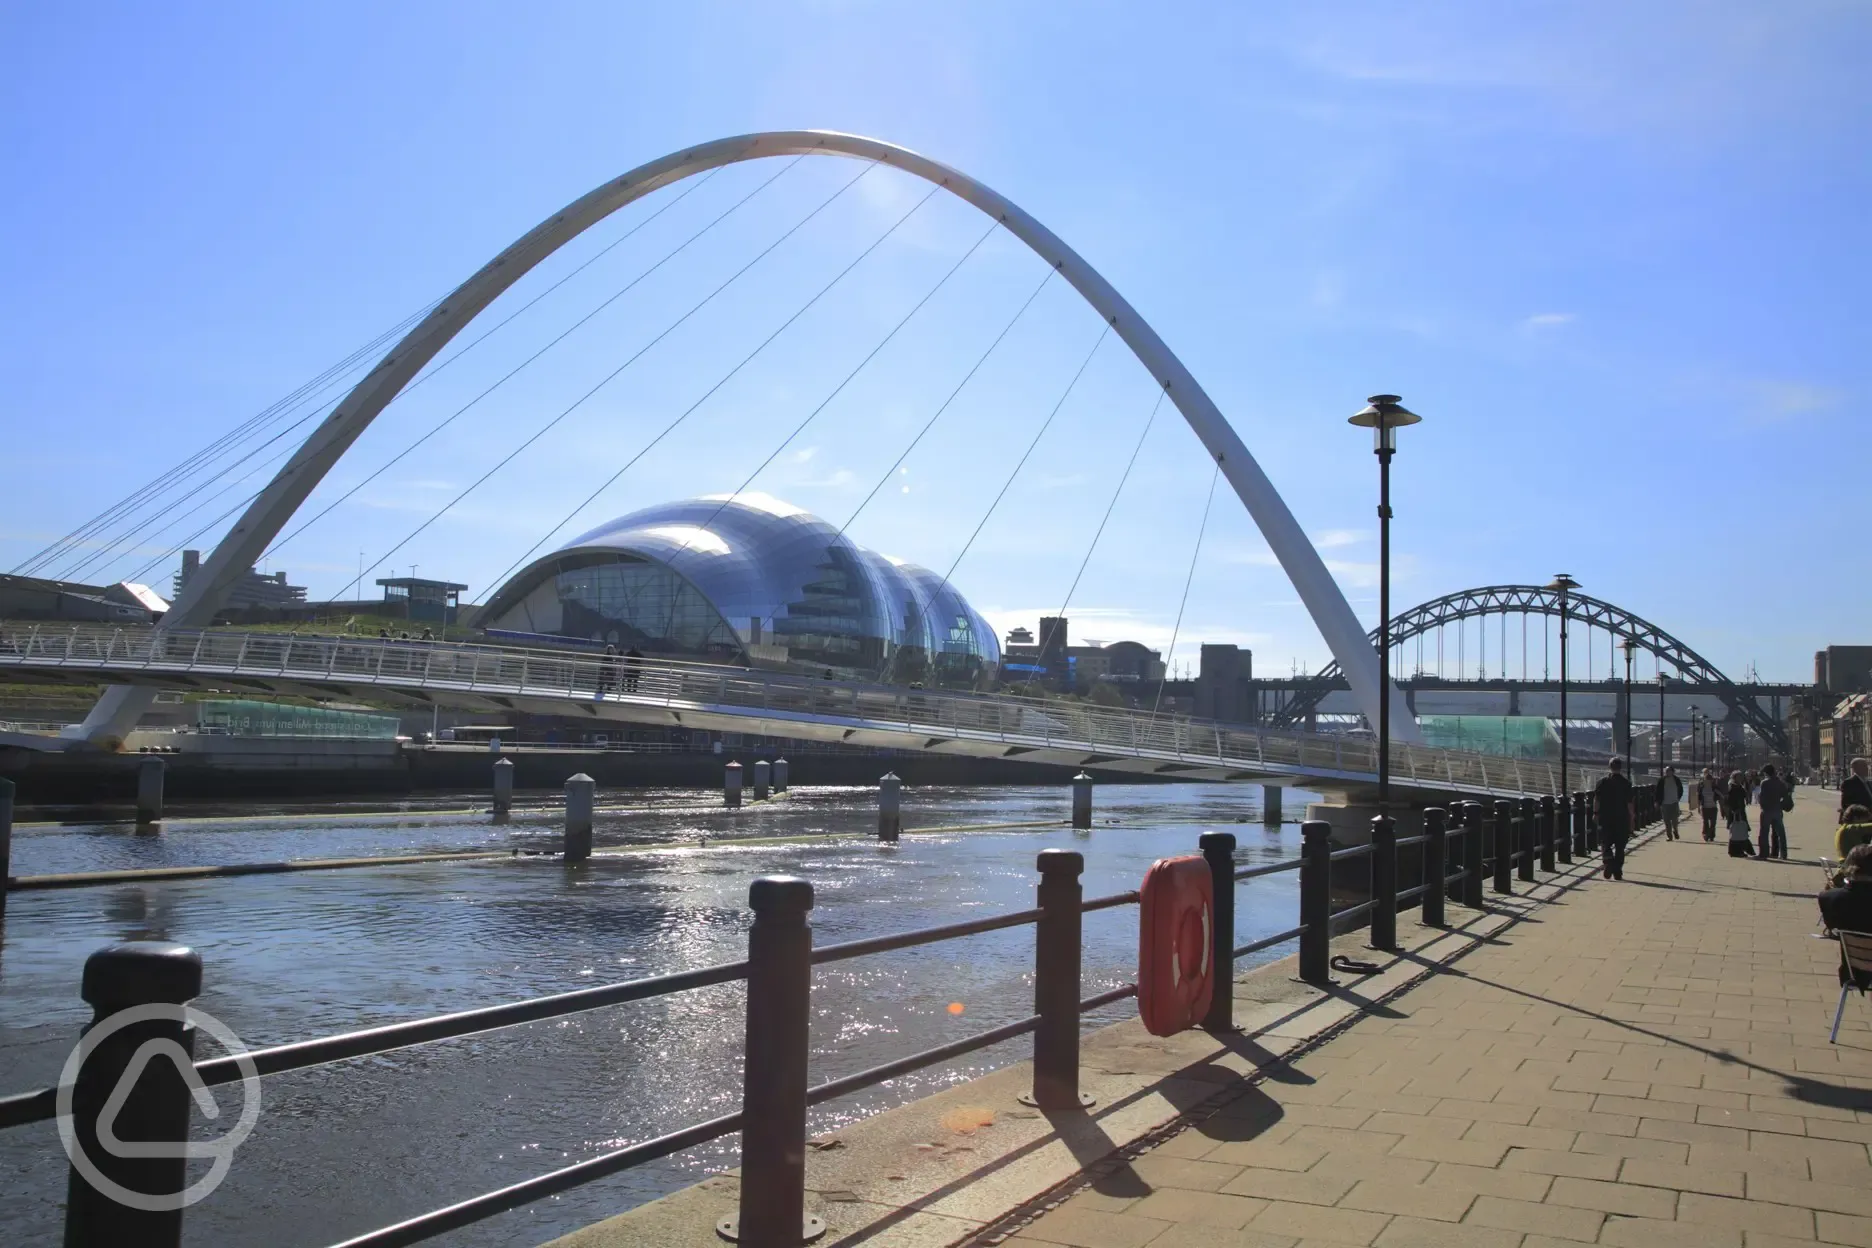 Just a 15 minute drive to the centre of Newcastle Upon Tyne